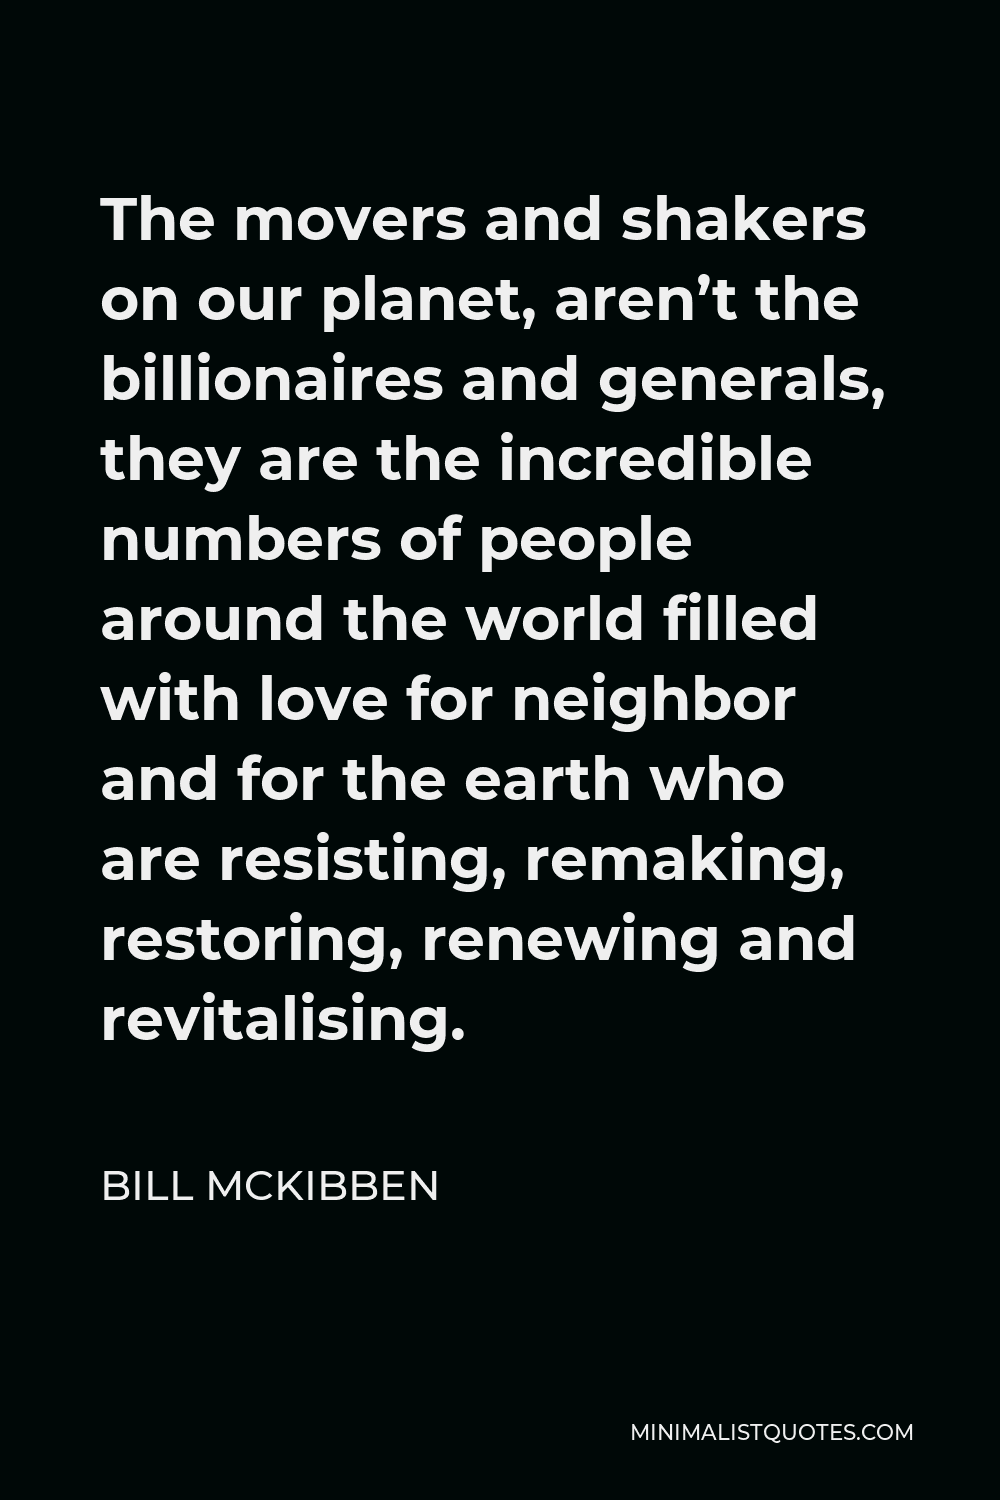 Bill McKibben Quote - The movers and shakers on our planet, aren’t the billionaires and generals, they are the incredible numbers of people around the world filled with love for neighbor and for the earth who are resisting, remaking, restoring, renewing and revitalising.